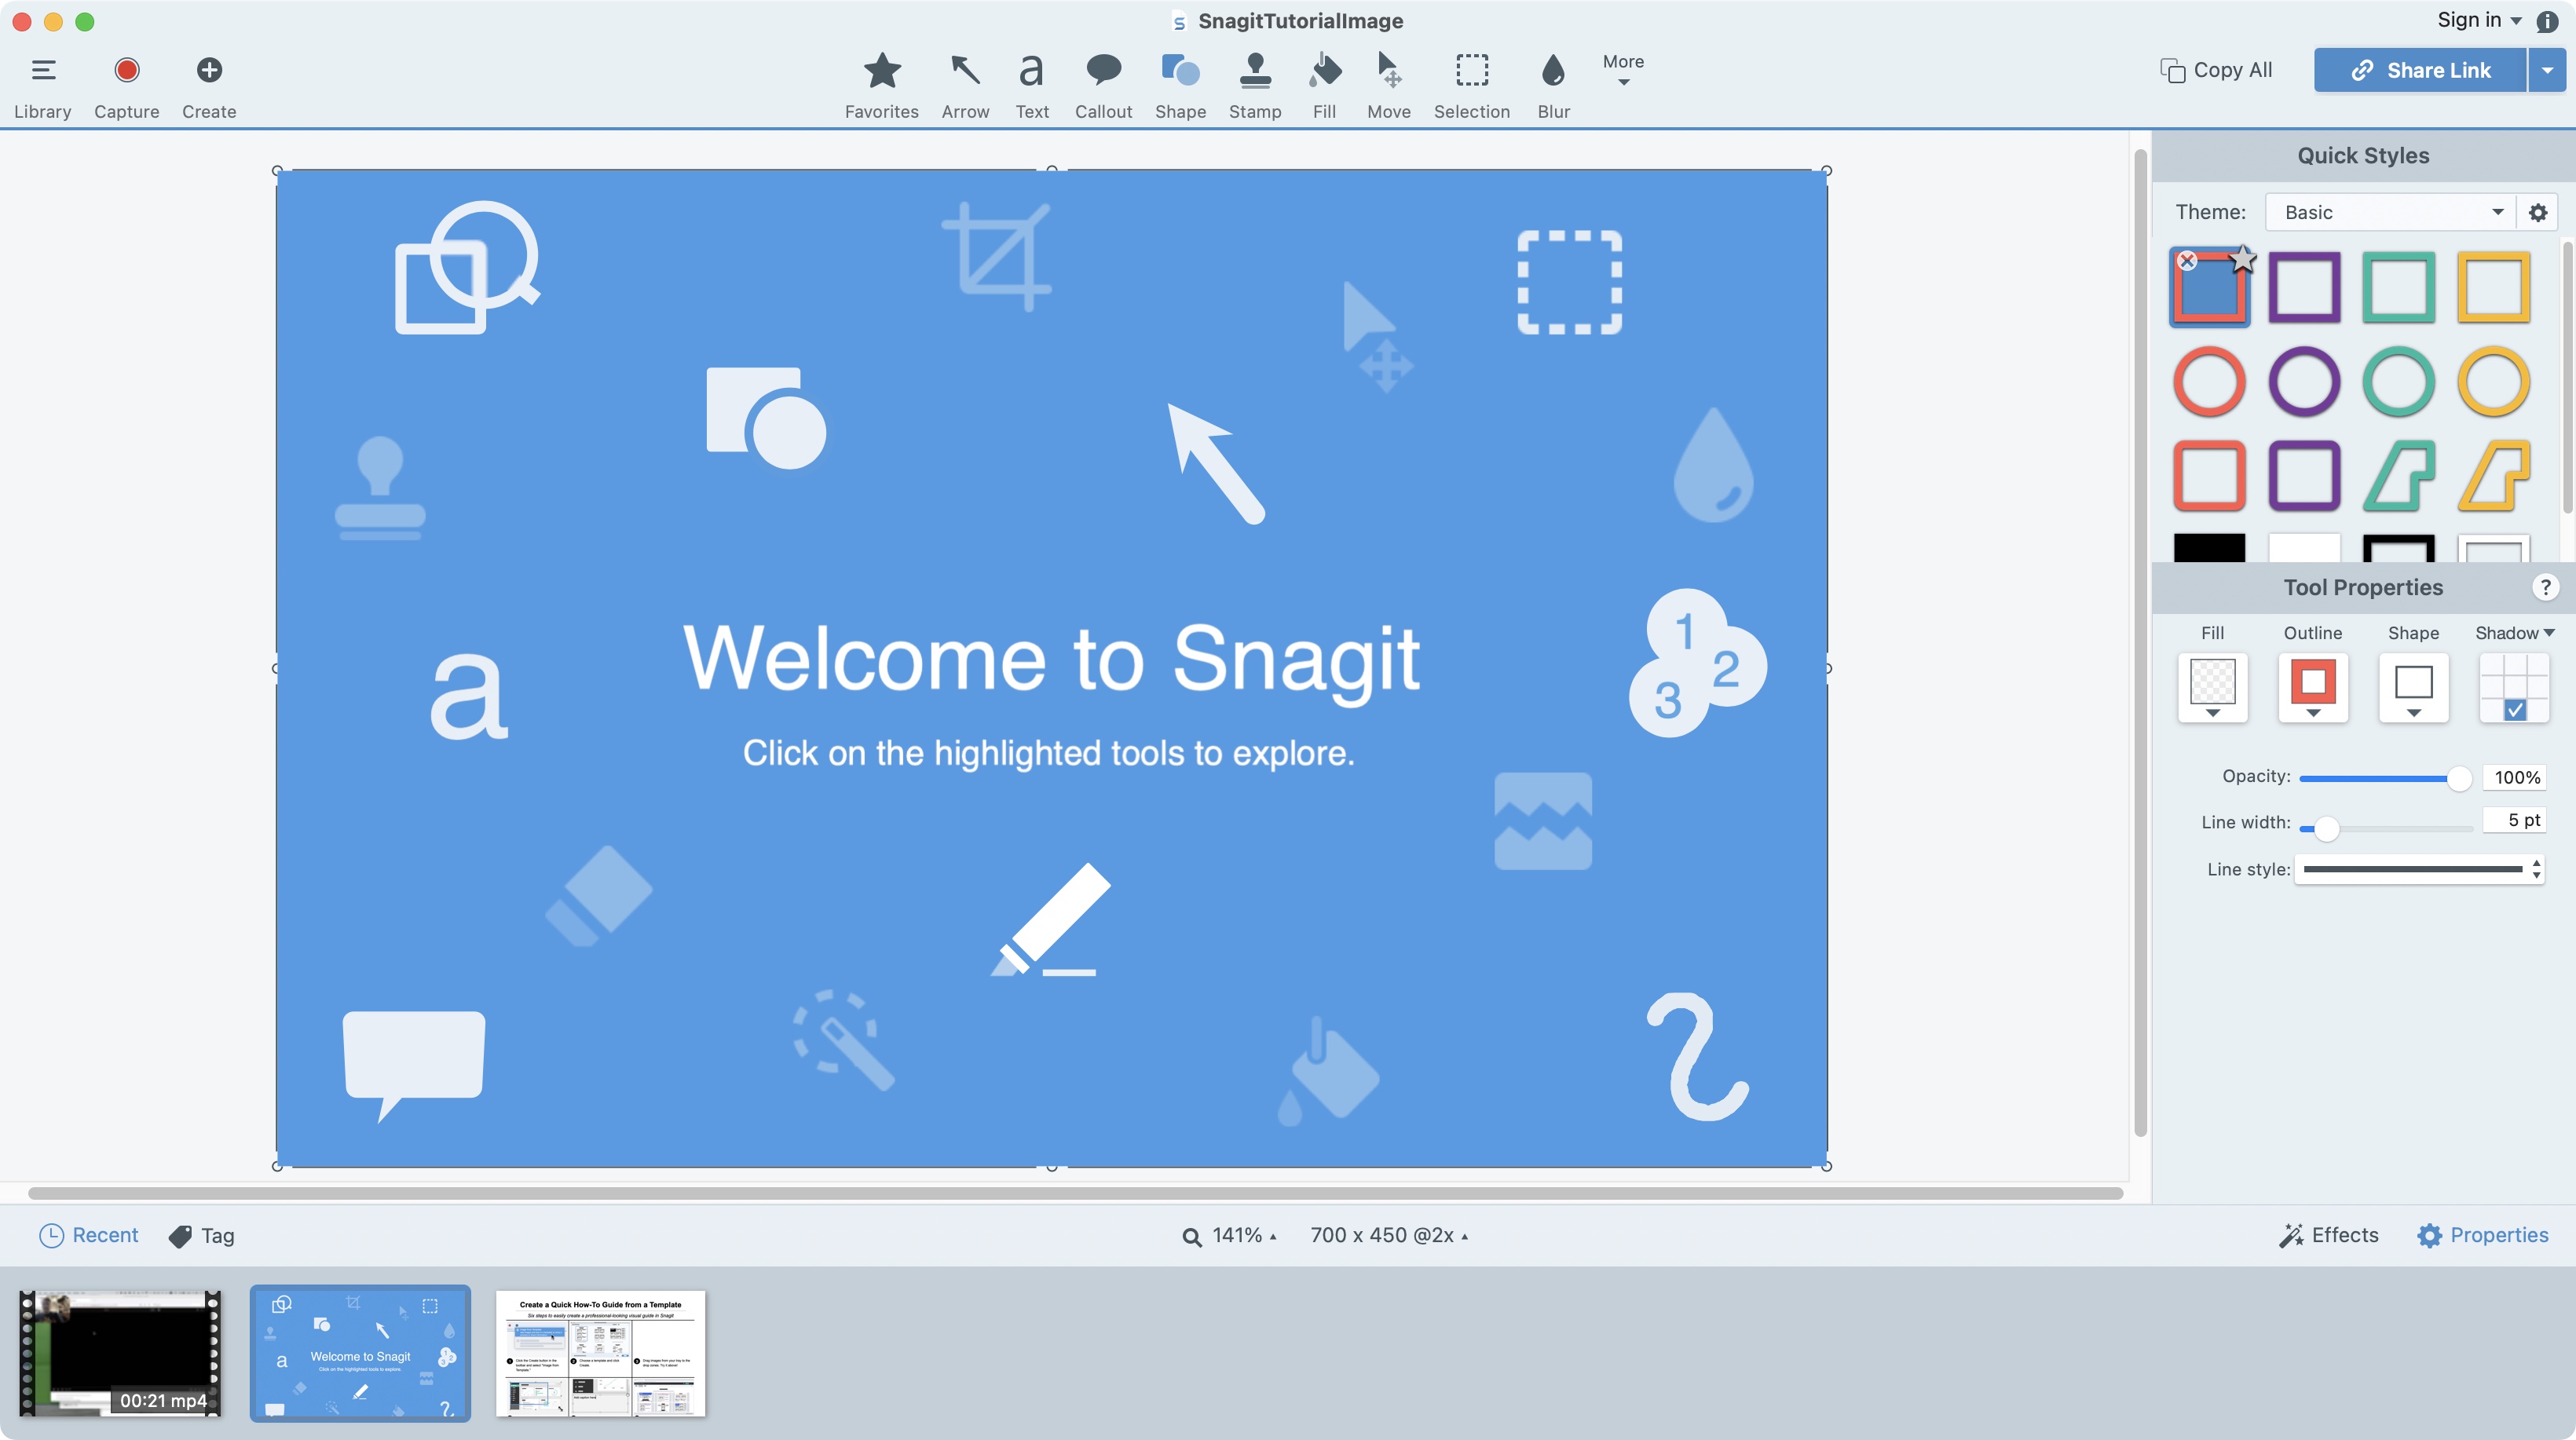 Snagit screen recorder by Techsmith during our hands-on testing process